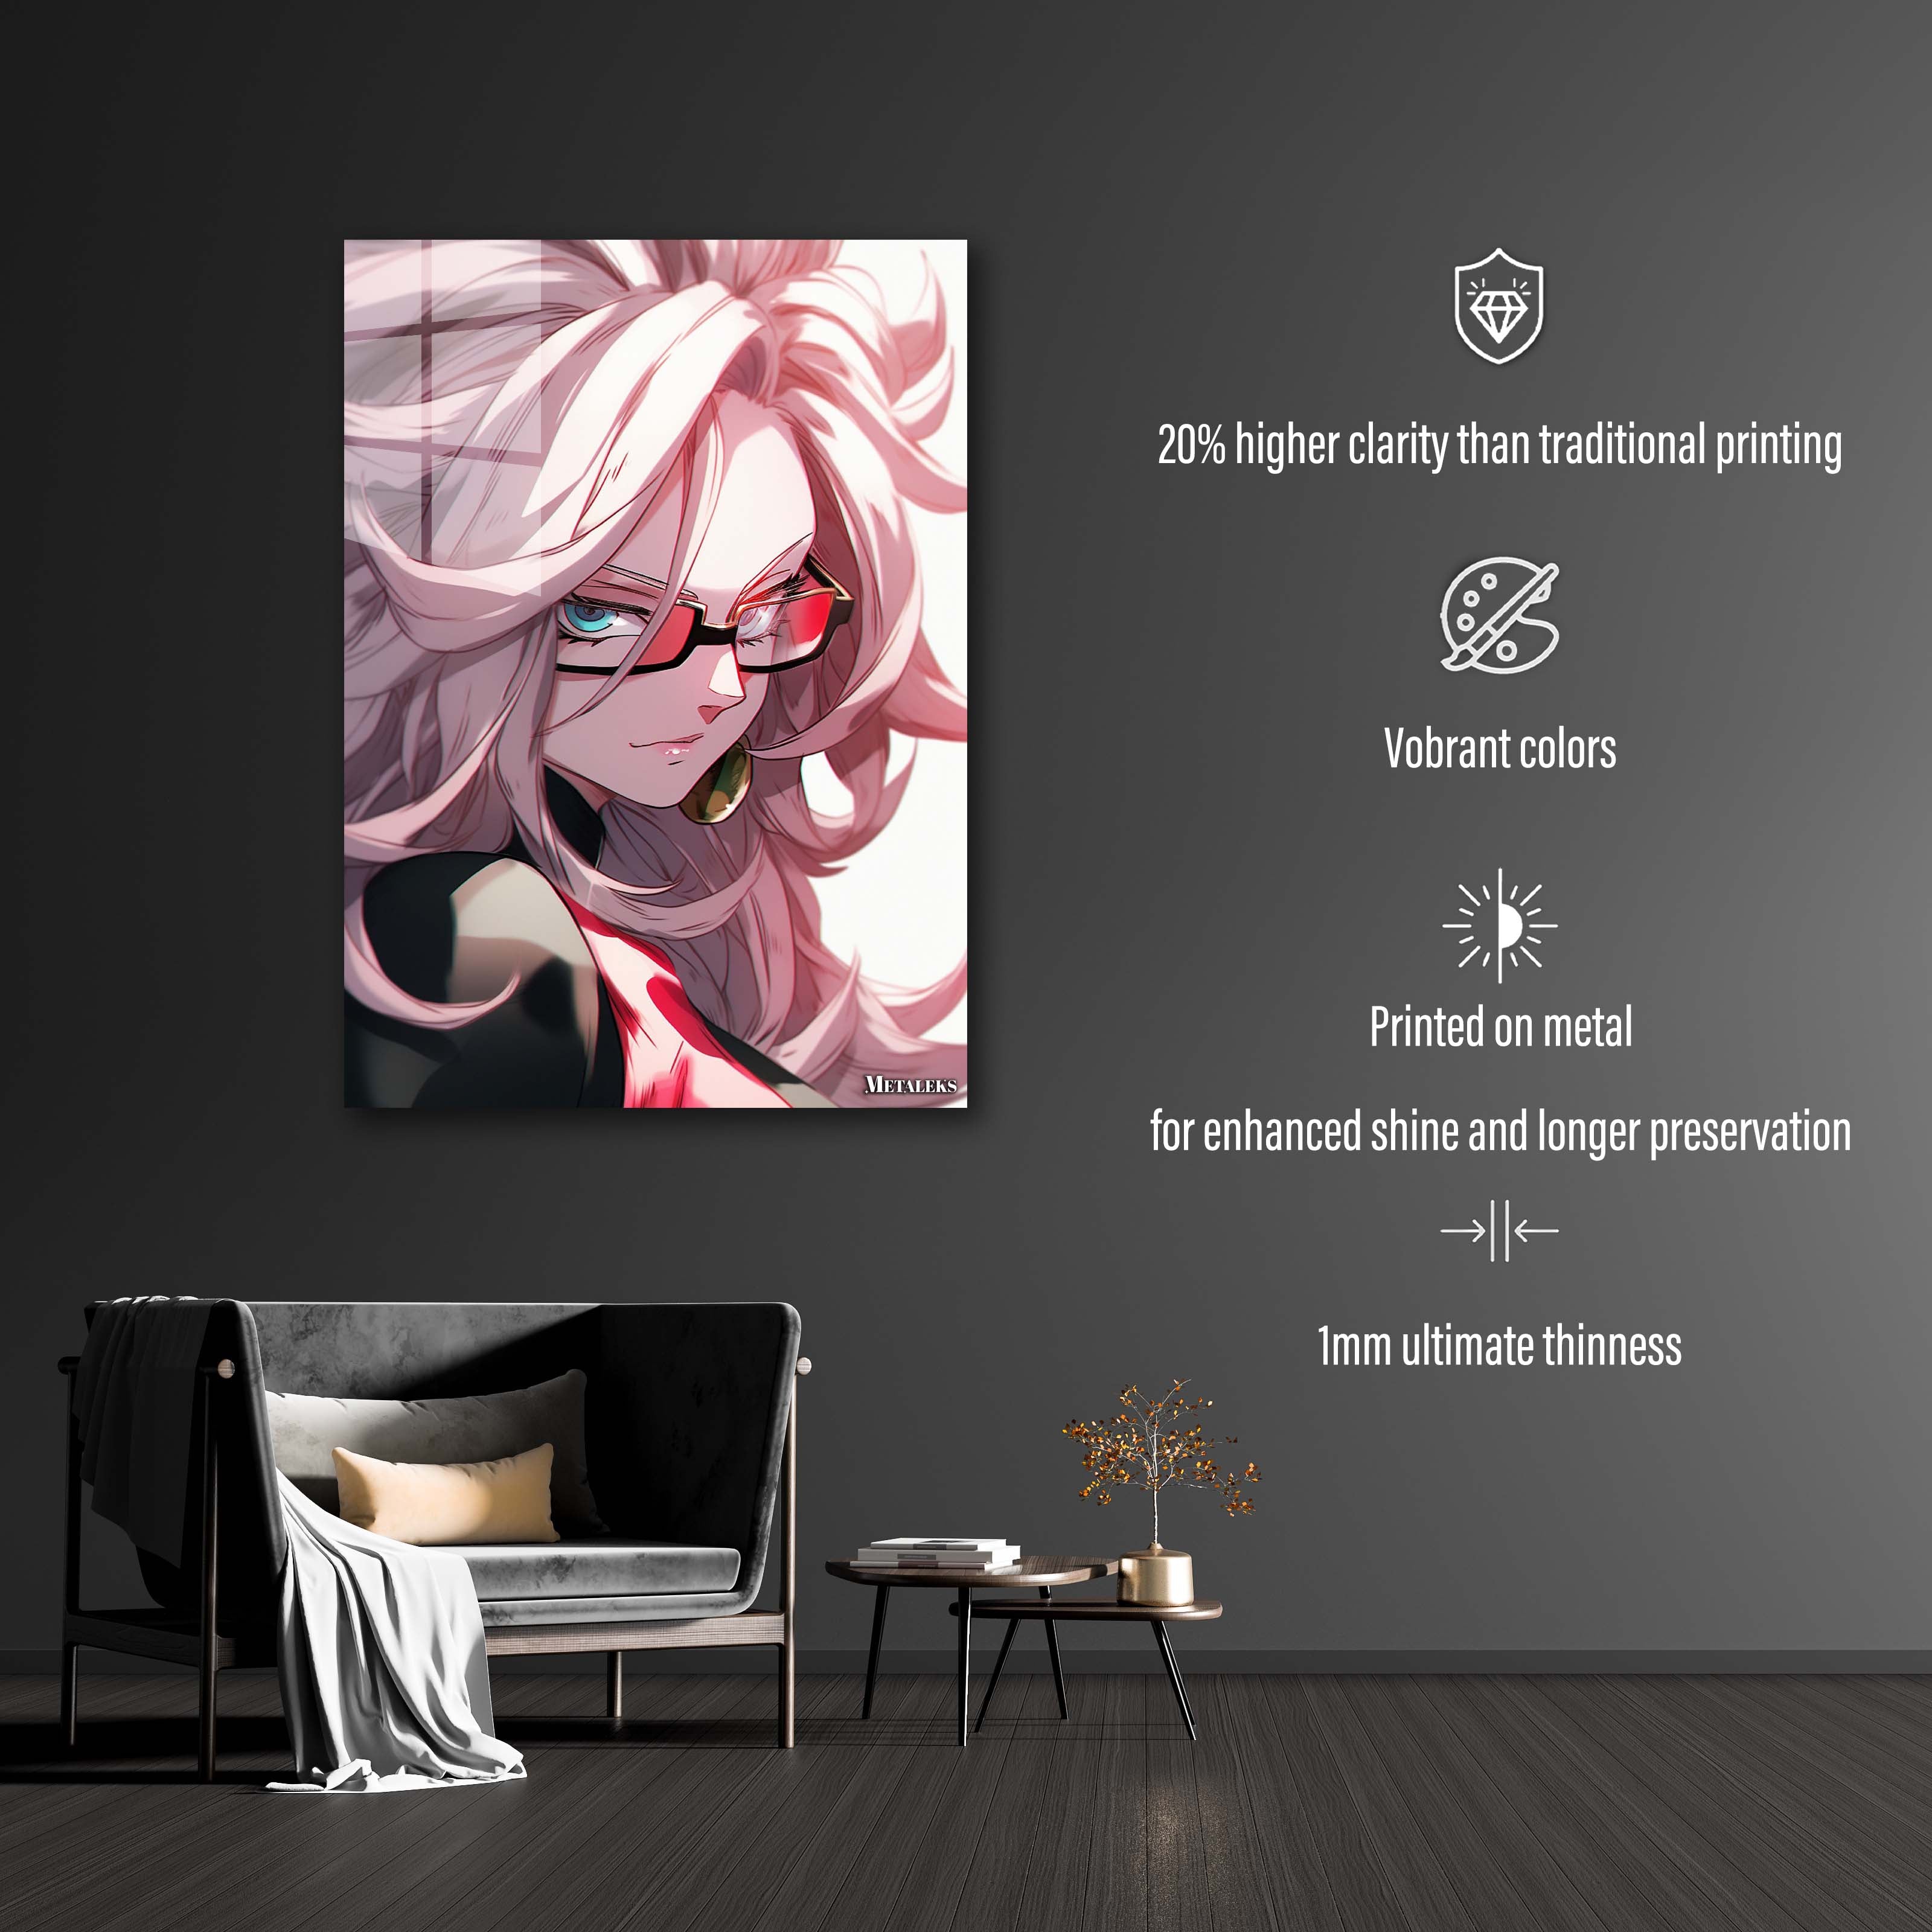 Cell's Legacy_ Android 21's Unseen Chronicles-designed by @theanimecrossover